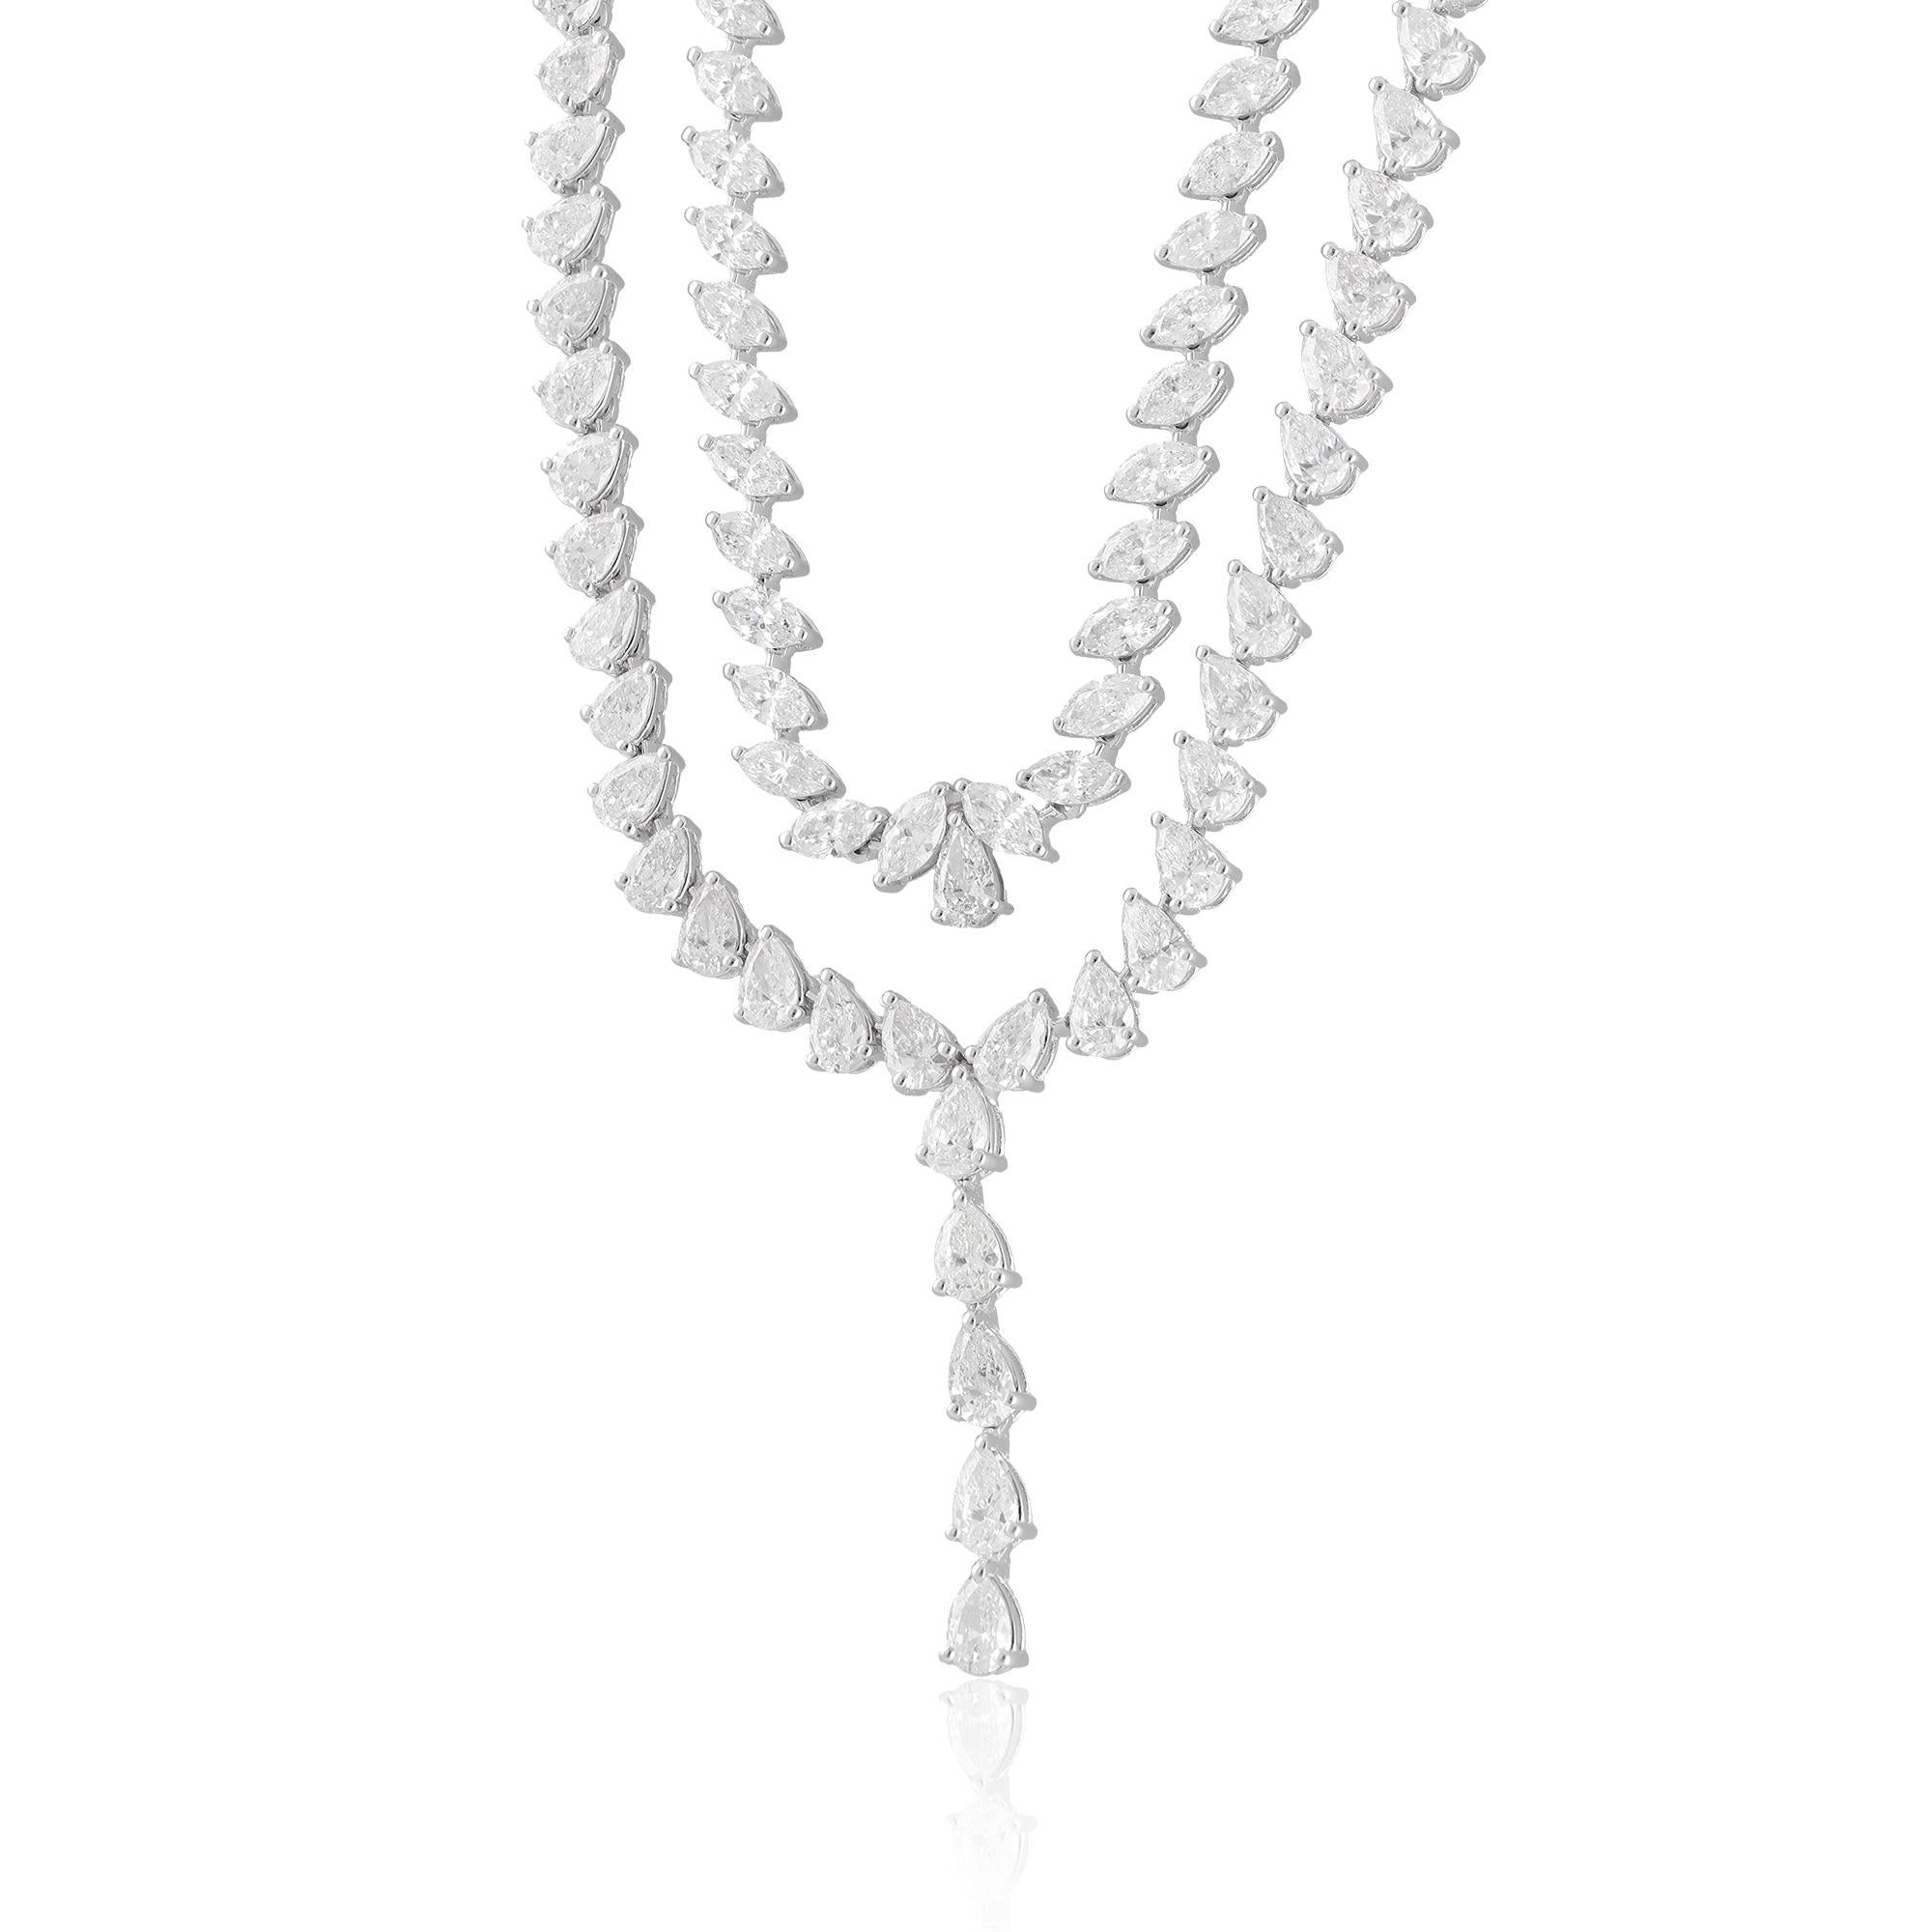 We're describing a lariat necklace made from 14 karat white gold, featuring a combination of marquise and pear-shaped diamonds. This necklace is characterized as handmade jewelry, indicating that it has been crafted with individual attention and